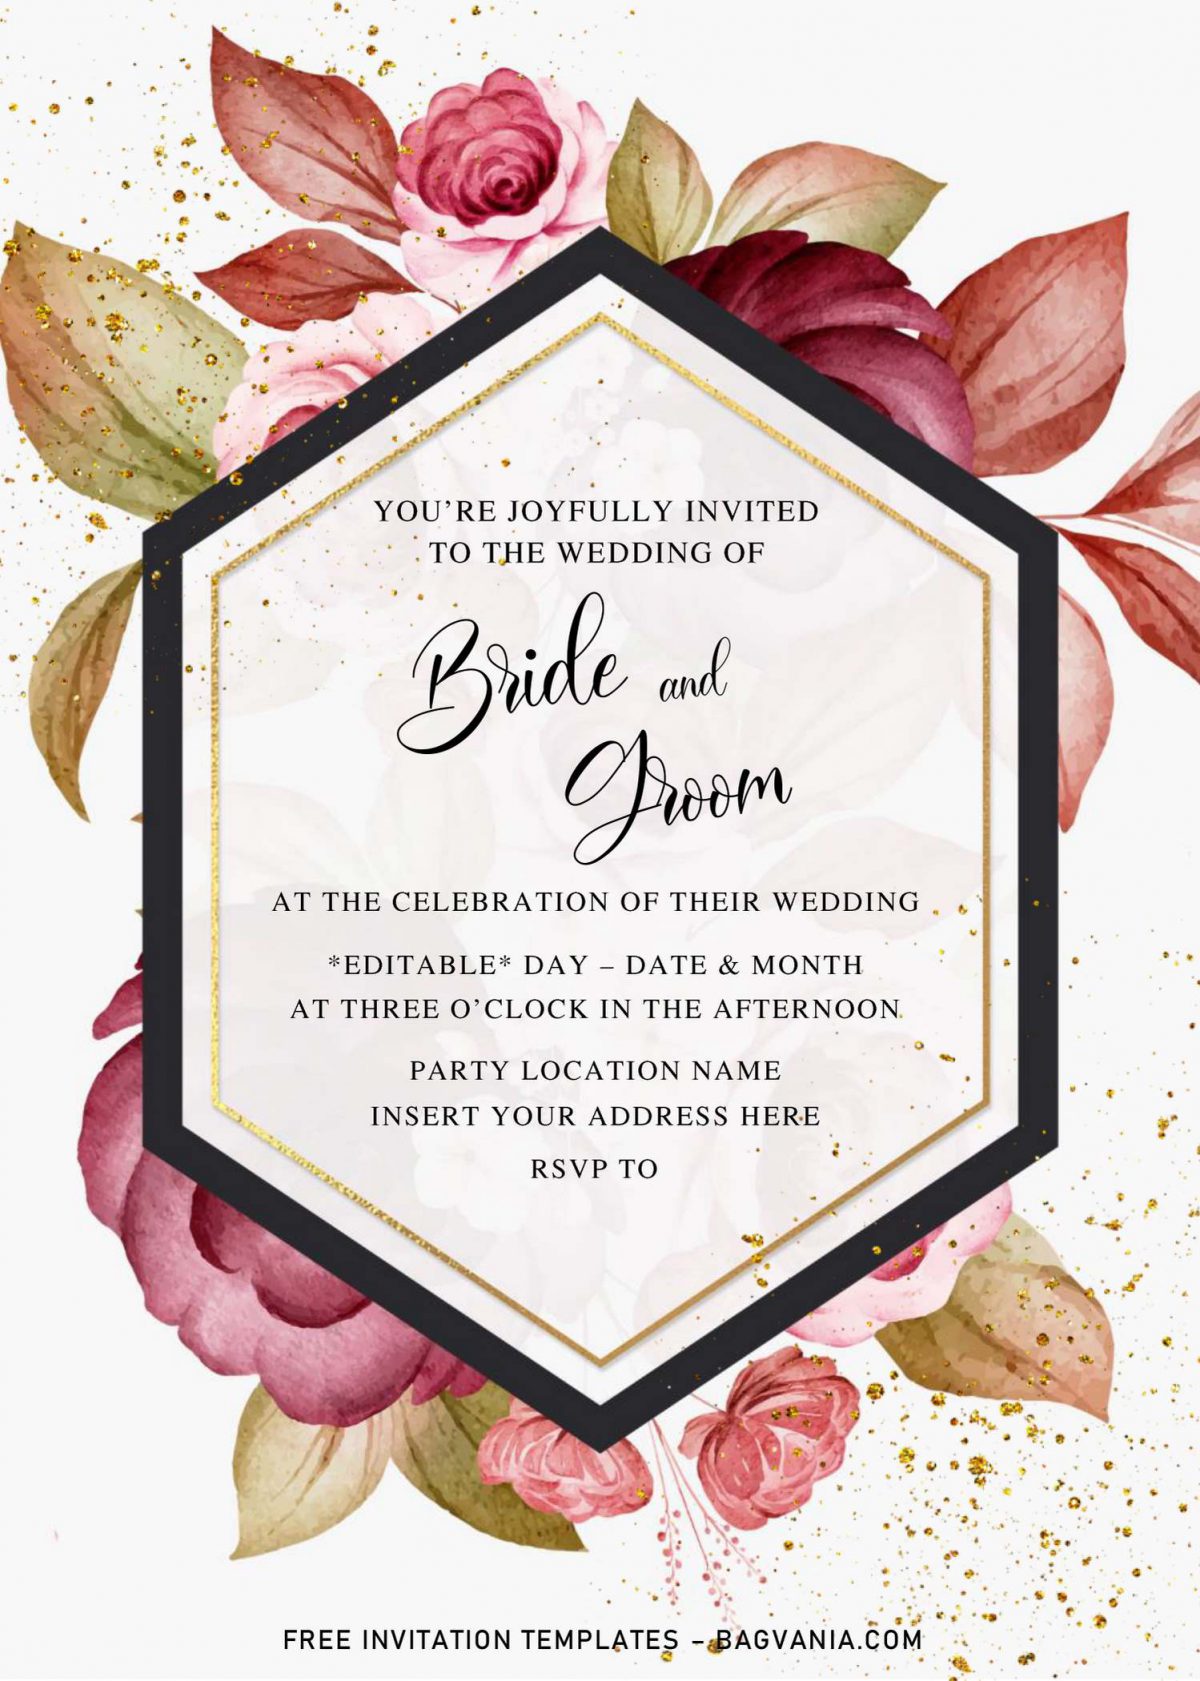 Free Burgundy Floral Wedding Invitation Templates For Word and has polygon shaped text box